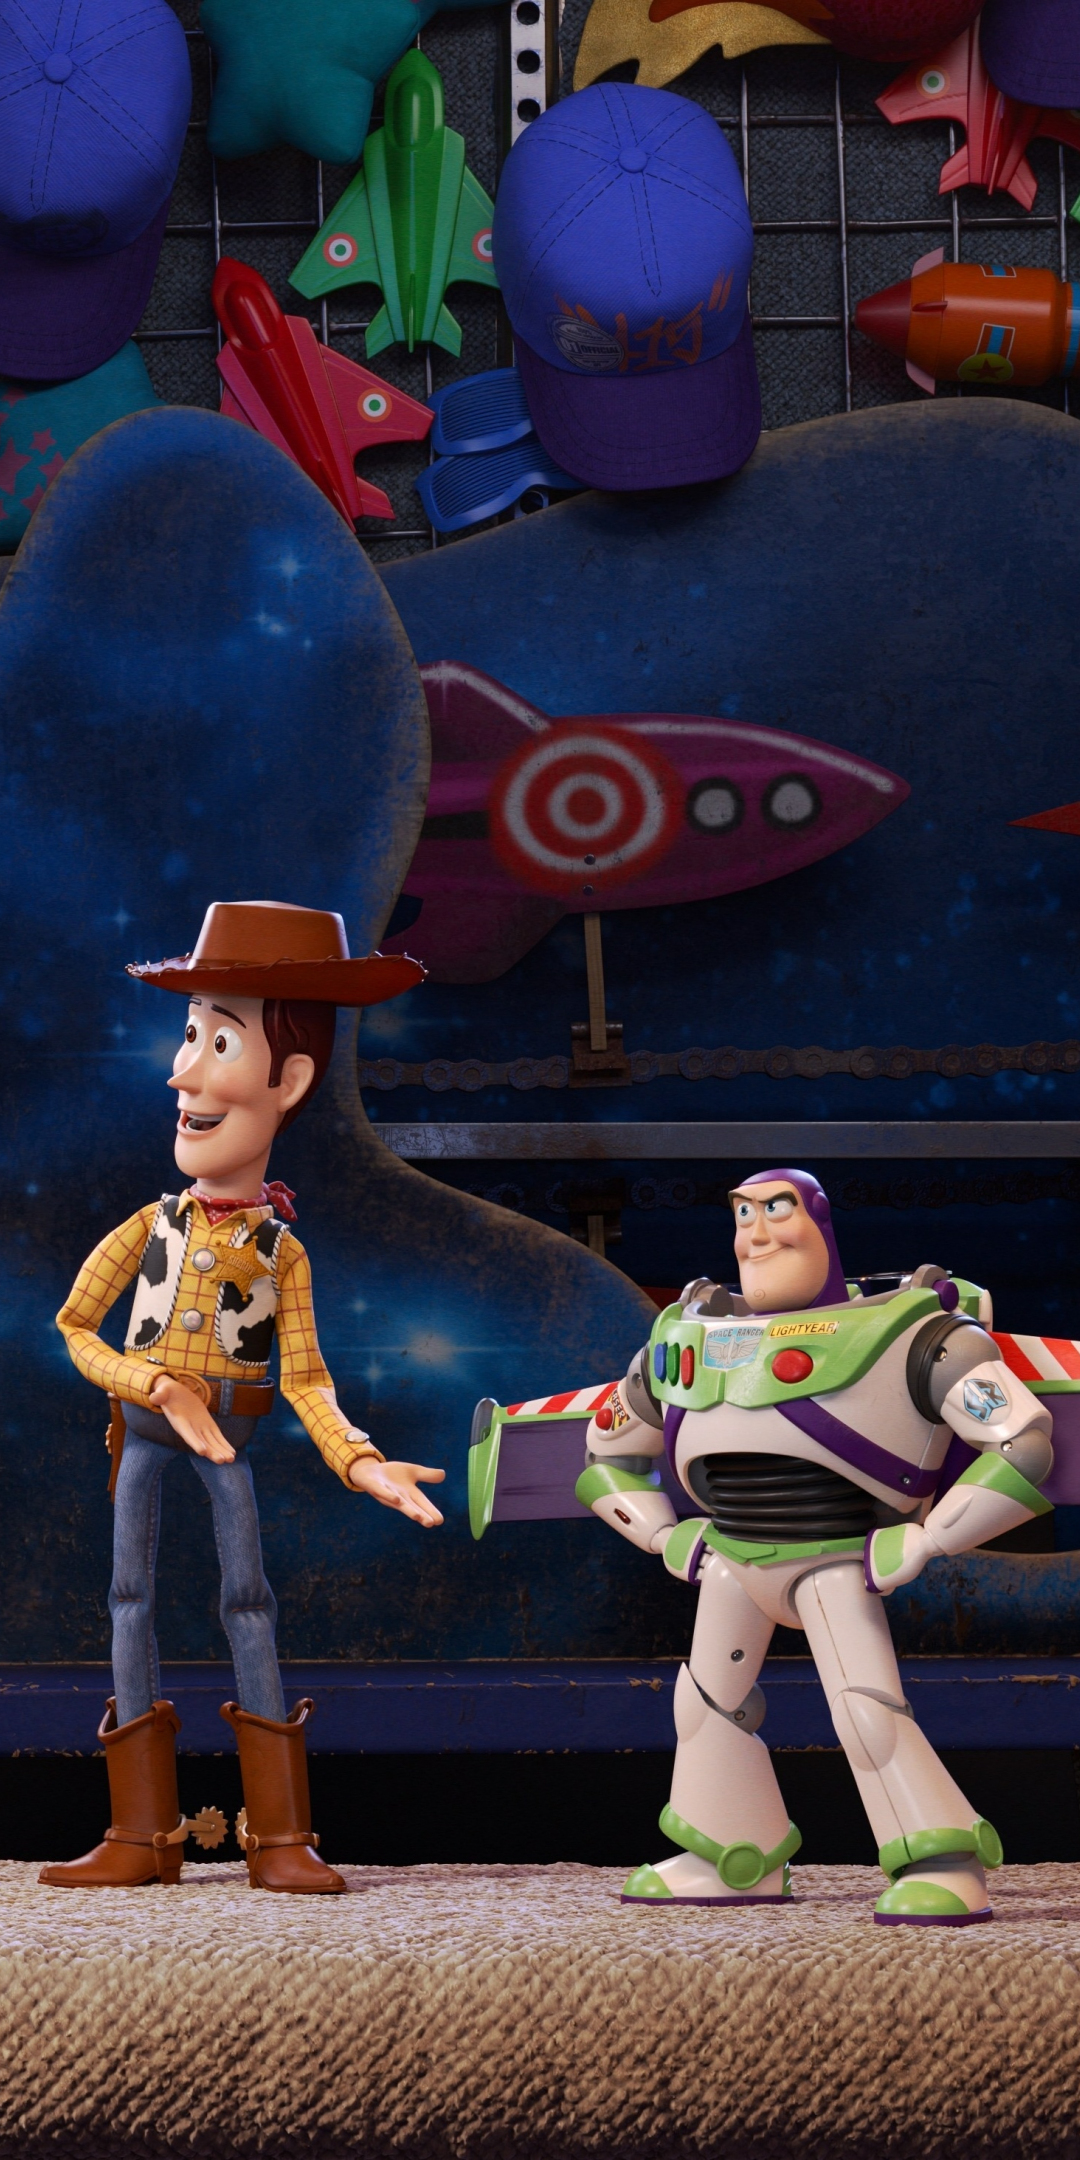 Download Wallpaper 1080x2160 Toy Story 4 Woody Buzz Lightyear